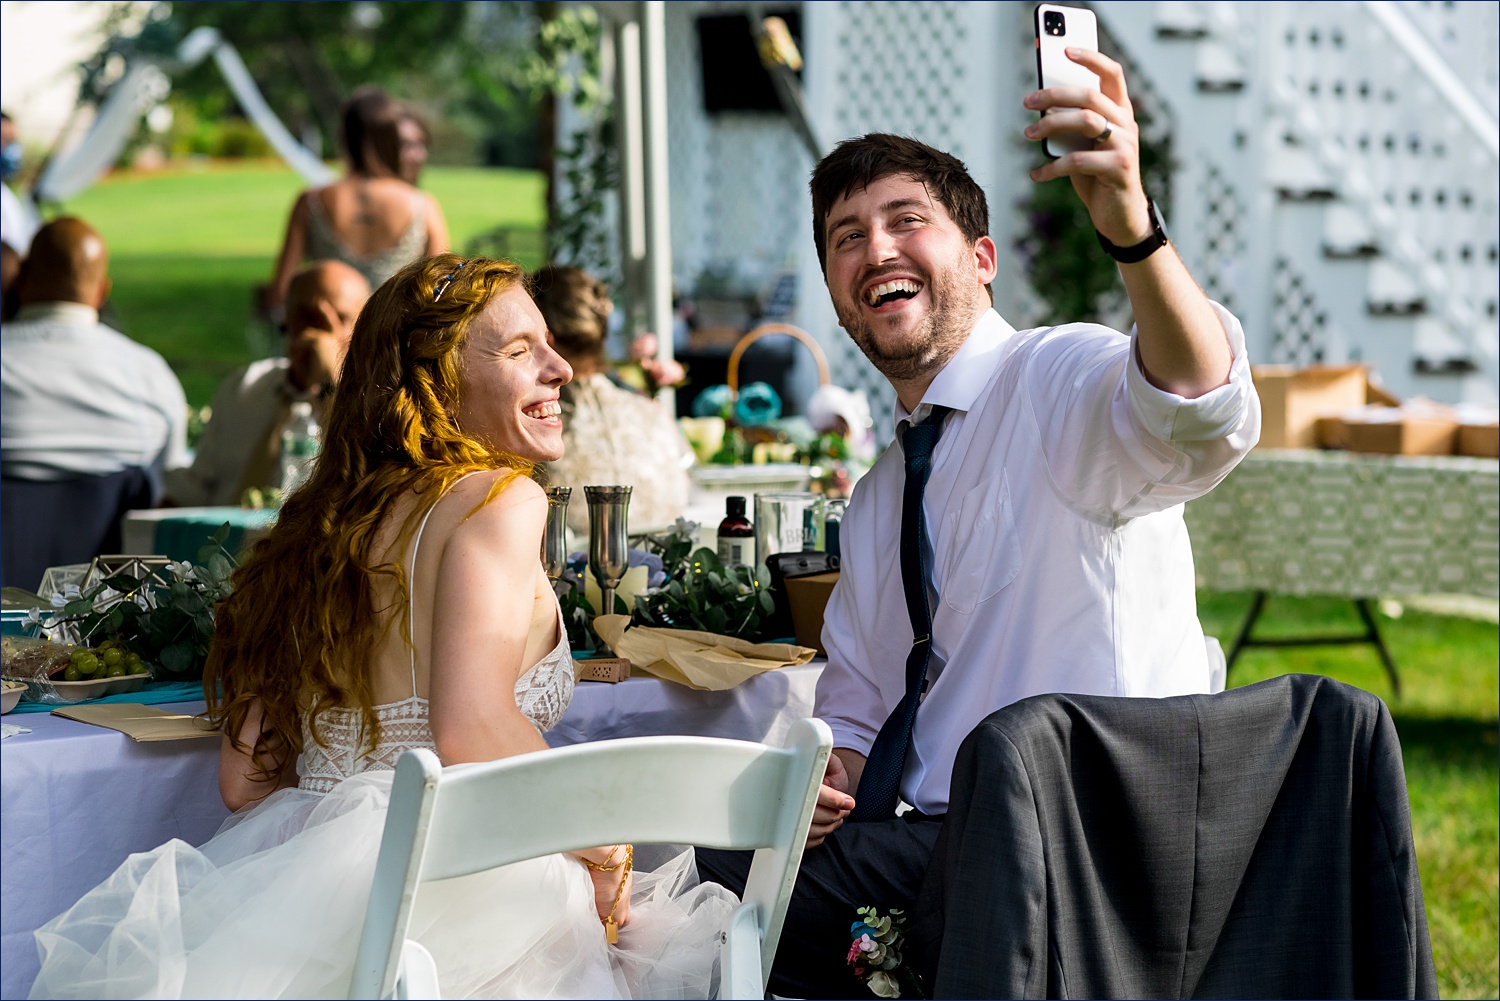 The bride and groom laugh on a Facetime call during their intimate backyard wedding in Andover MA